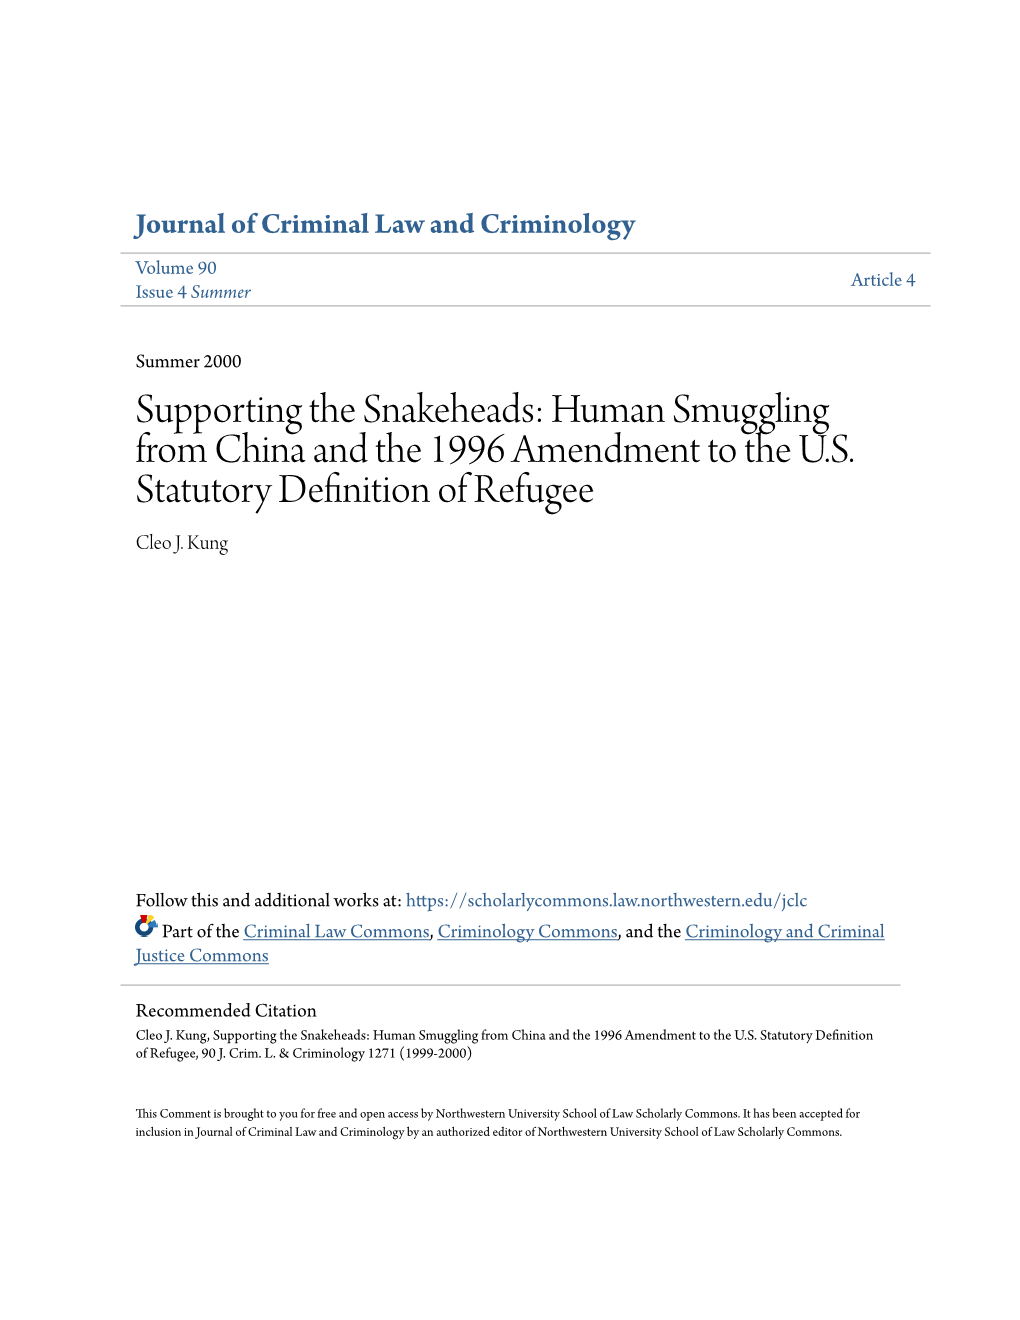 Supporting the Snakeheads: Human Smuggling from China and the 1996 Amendment to the U.S